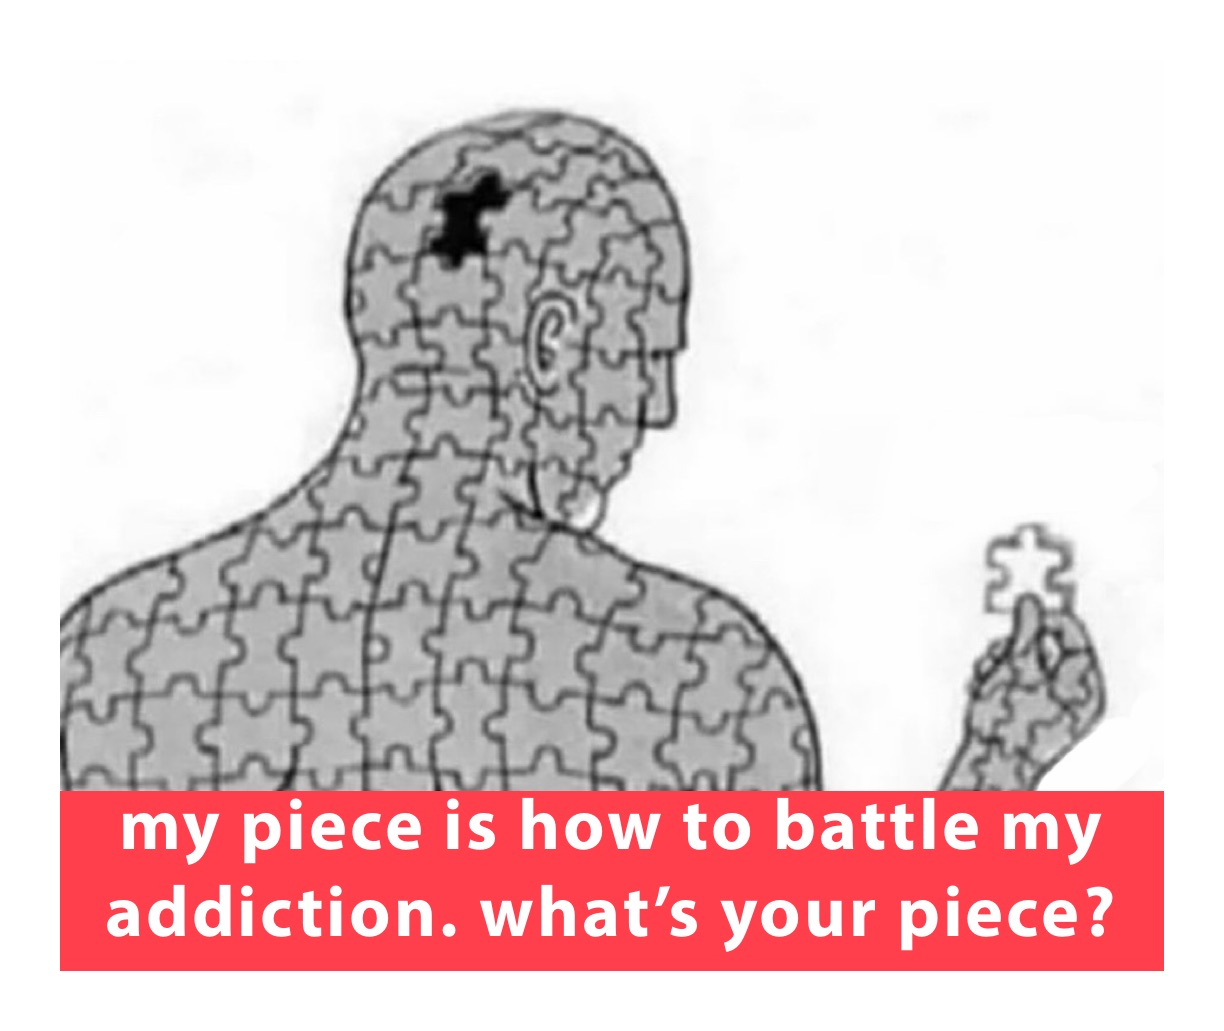 my piece is how to battle my addiction. what’s your piece?